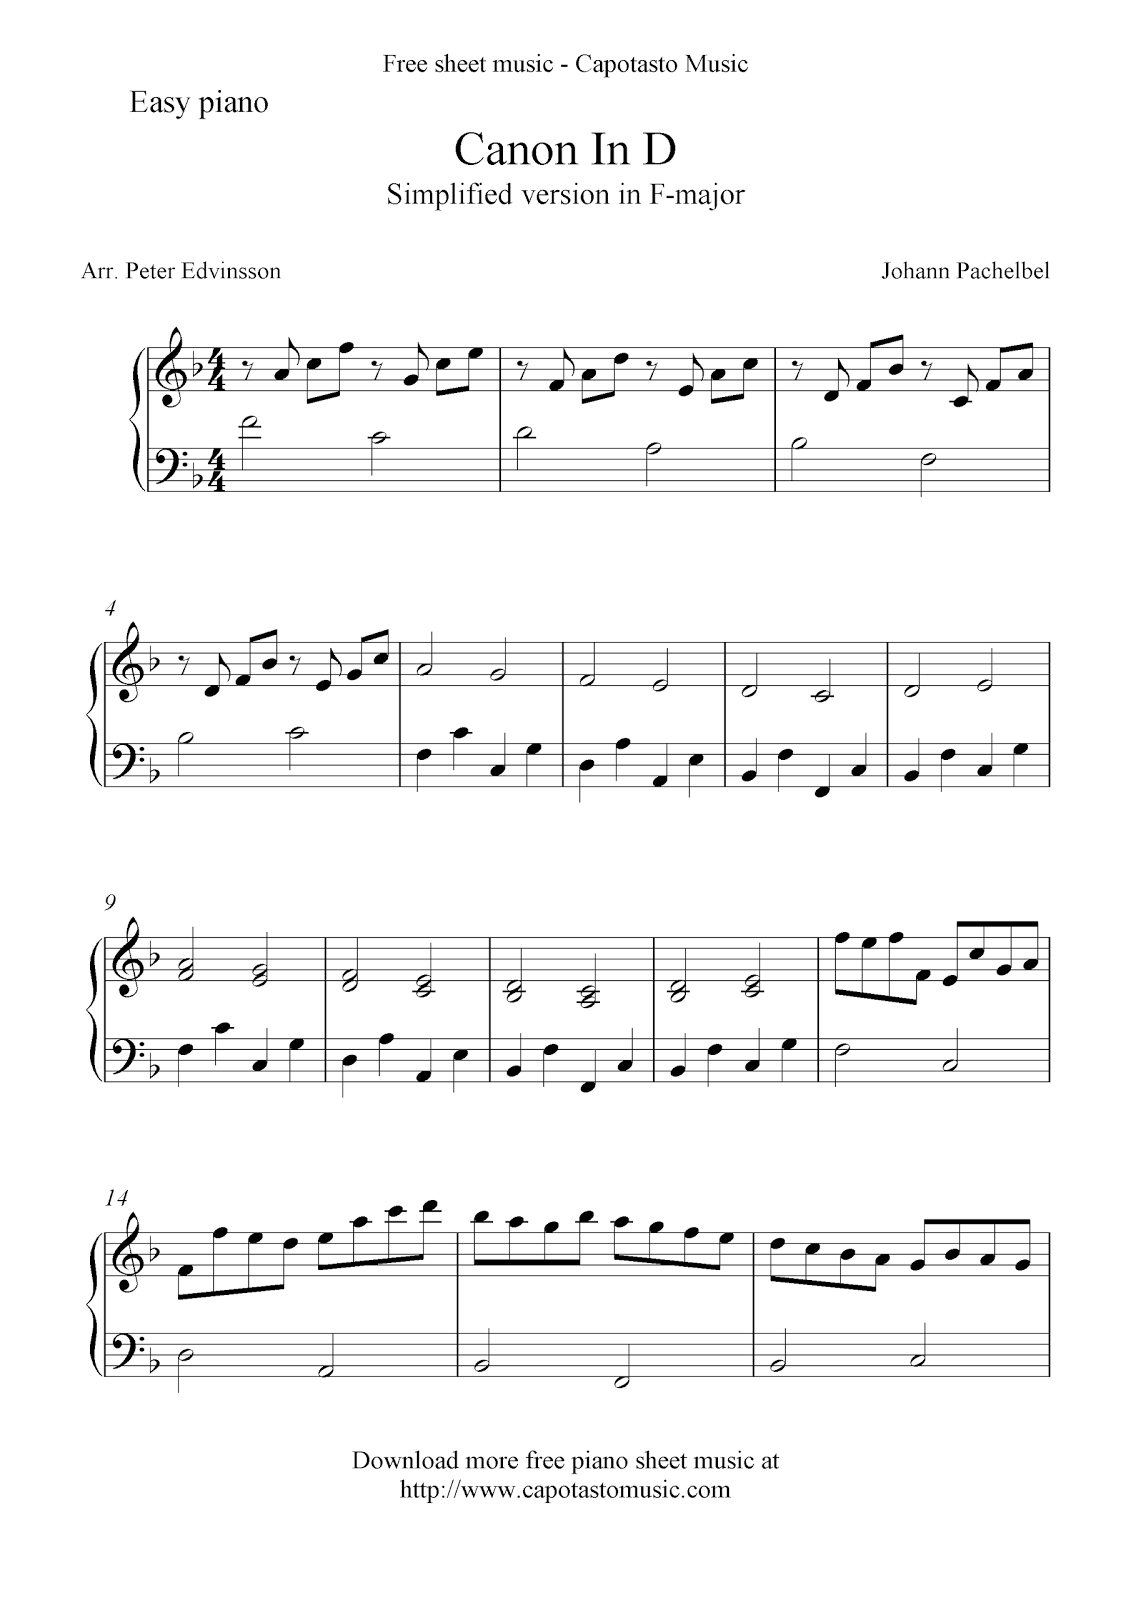 Free Easy Piano Sheet Music Solo. This Is A Simplified And Shortened - Free Piano Sheet Music Online Printable Popular Songs